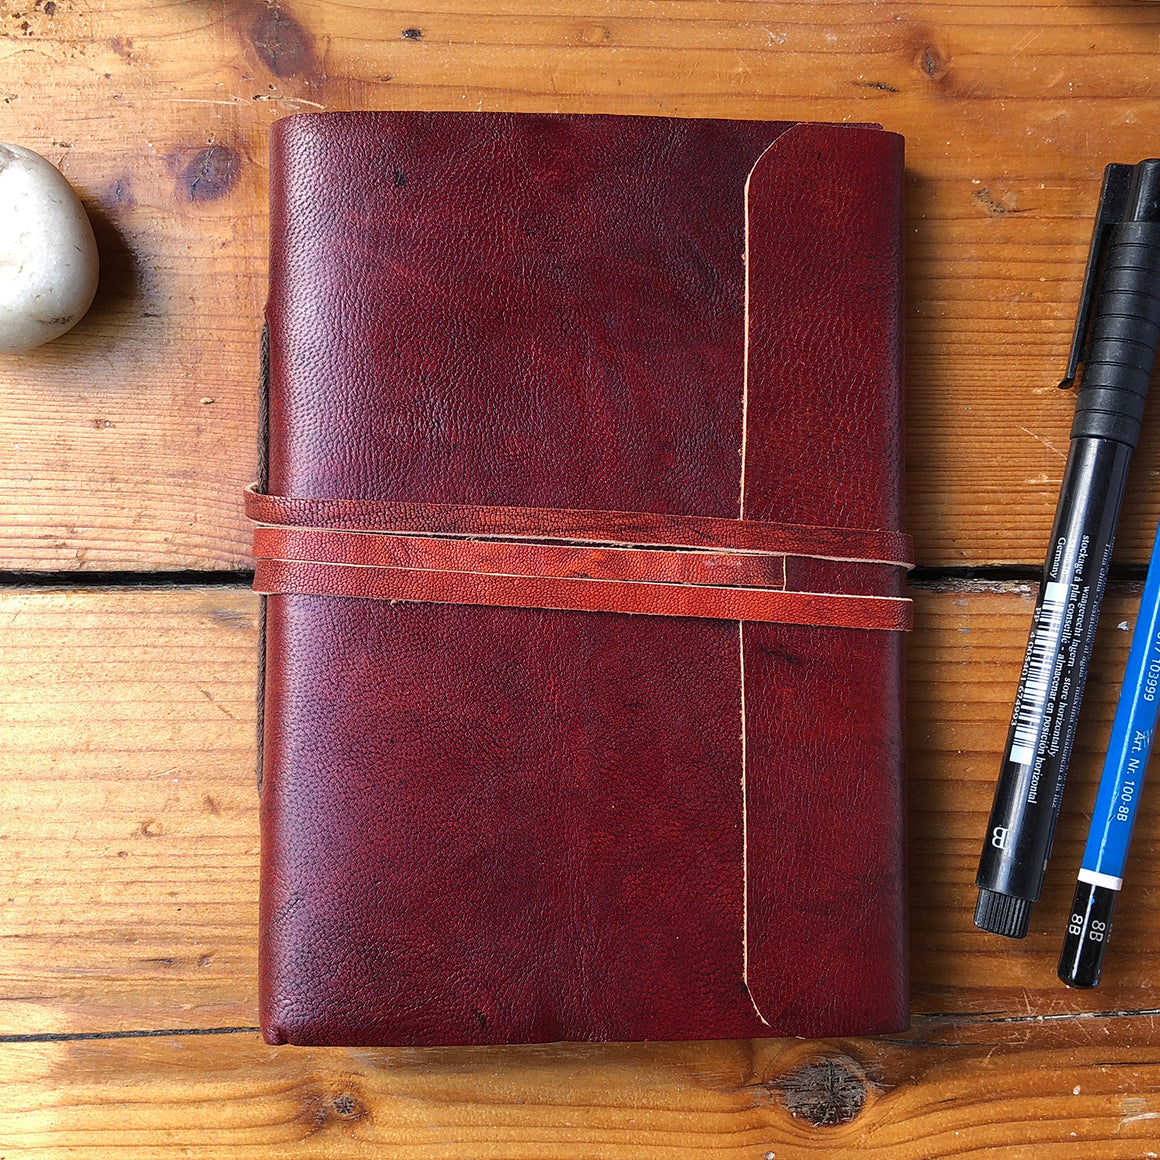 Fair Trade Leather Notebook with Folding Flap and Tie (2 Sizes) / Handmade Indian Leather Diary / Sketchbook / Journal - Large & Small Front Covers